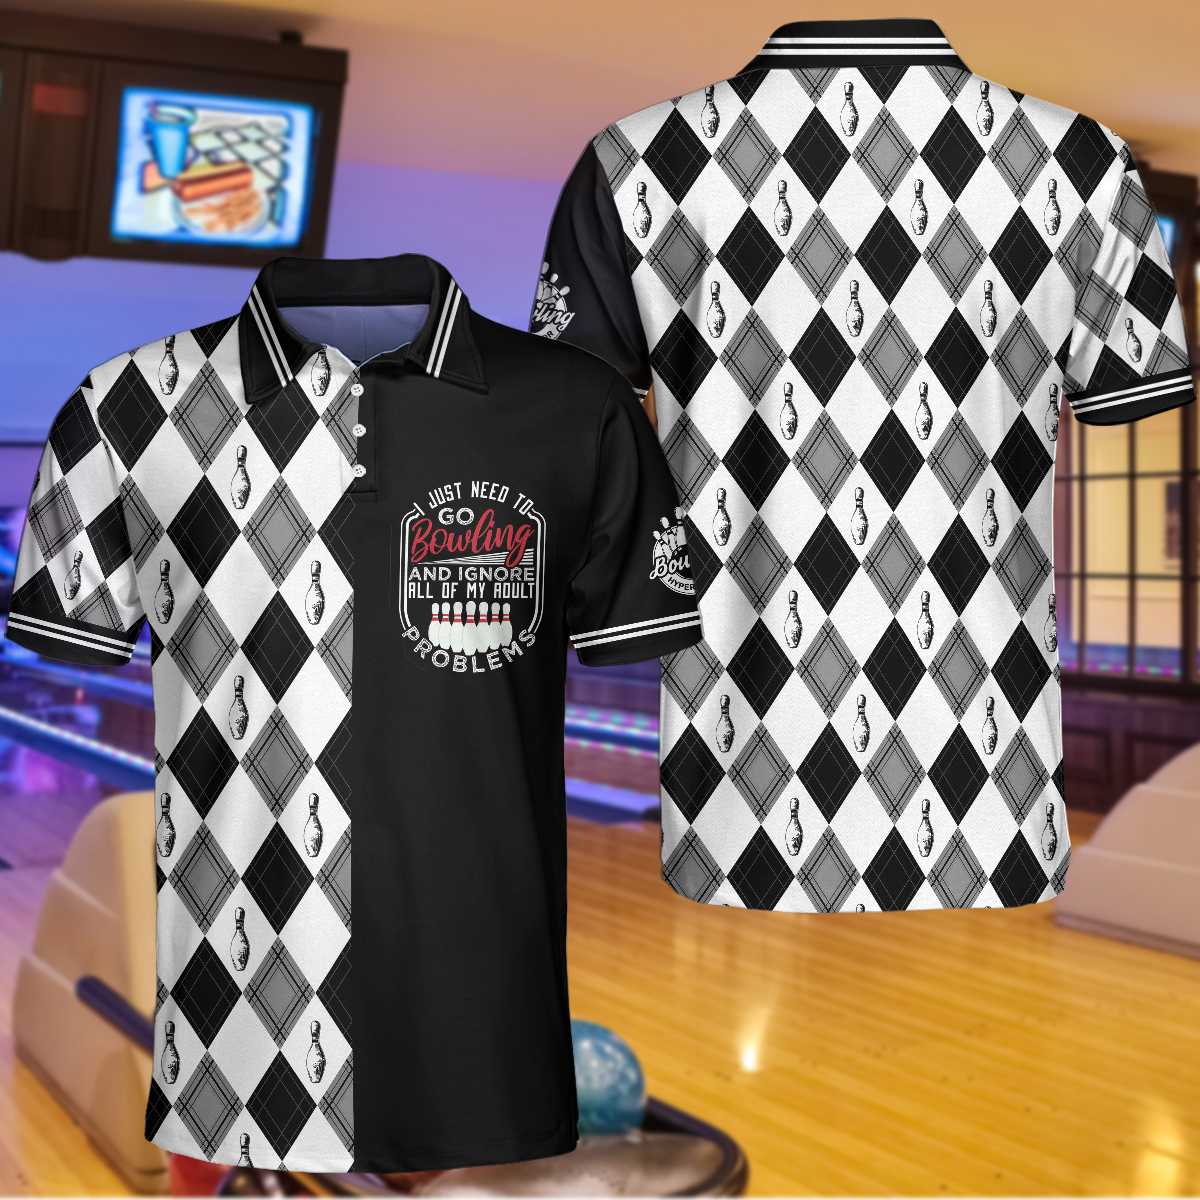 I Just Need To Go Bowling Polo Shirt/ Black And White Argyle Pattern Polo Shirt/ Best Bowling Shirt For Men Coolspod